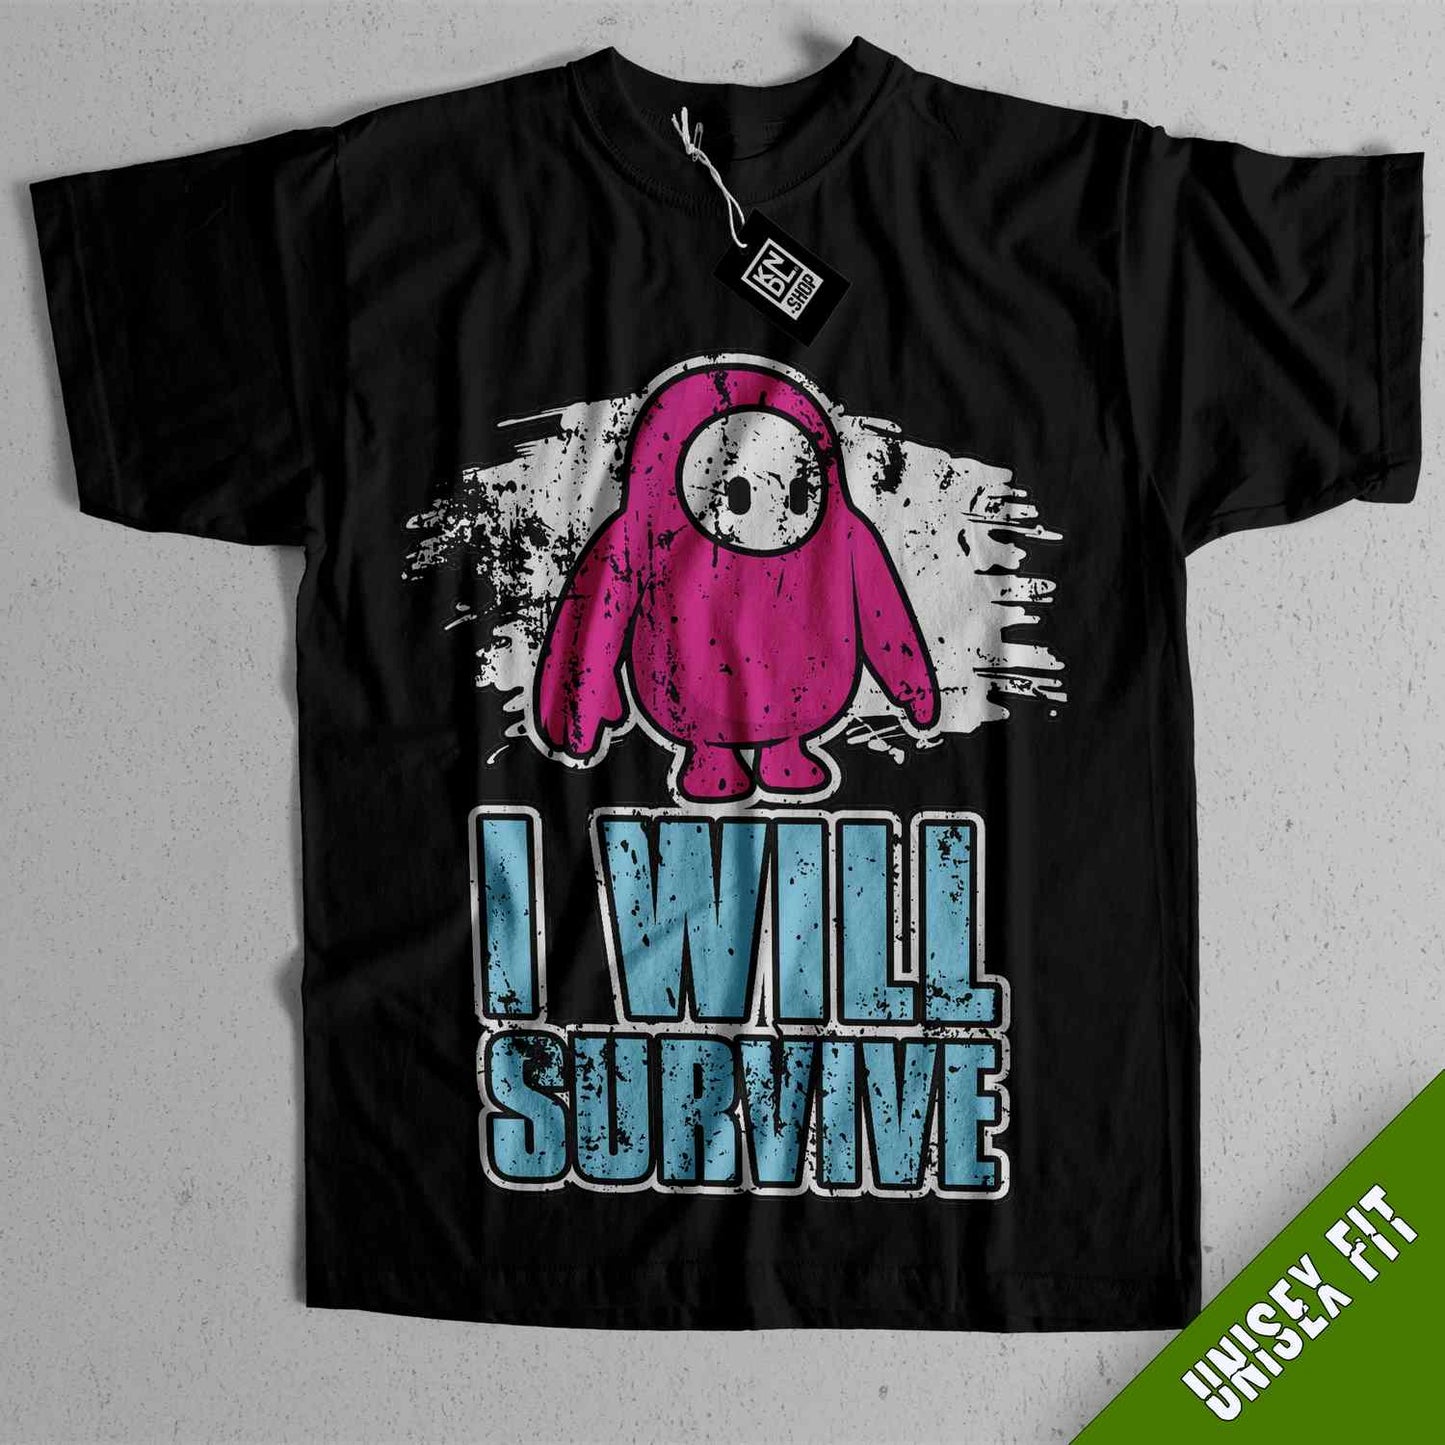 a black t - shirt with a pink cartoon character on it